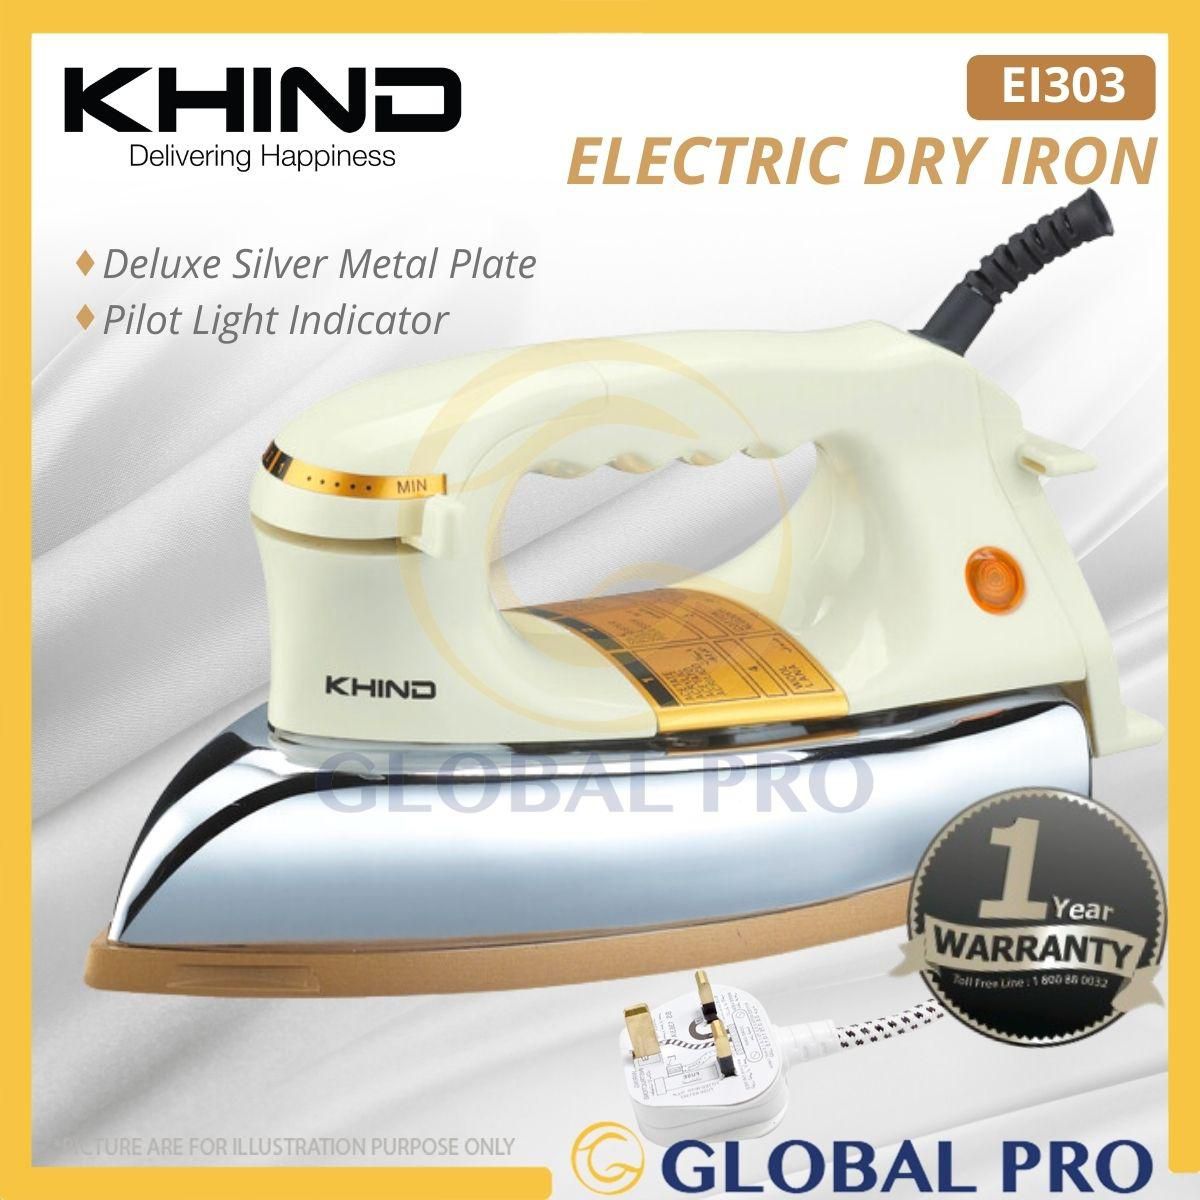 KHIND EI303 Electric Dry Iron Ceramic Coated Sole Plate 6 Temperature Settings